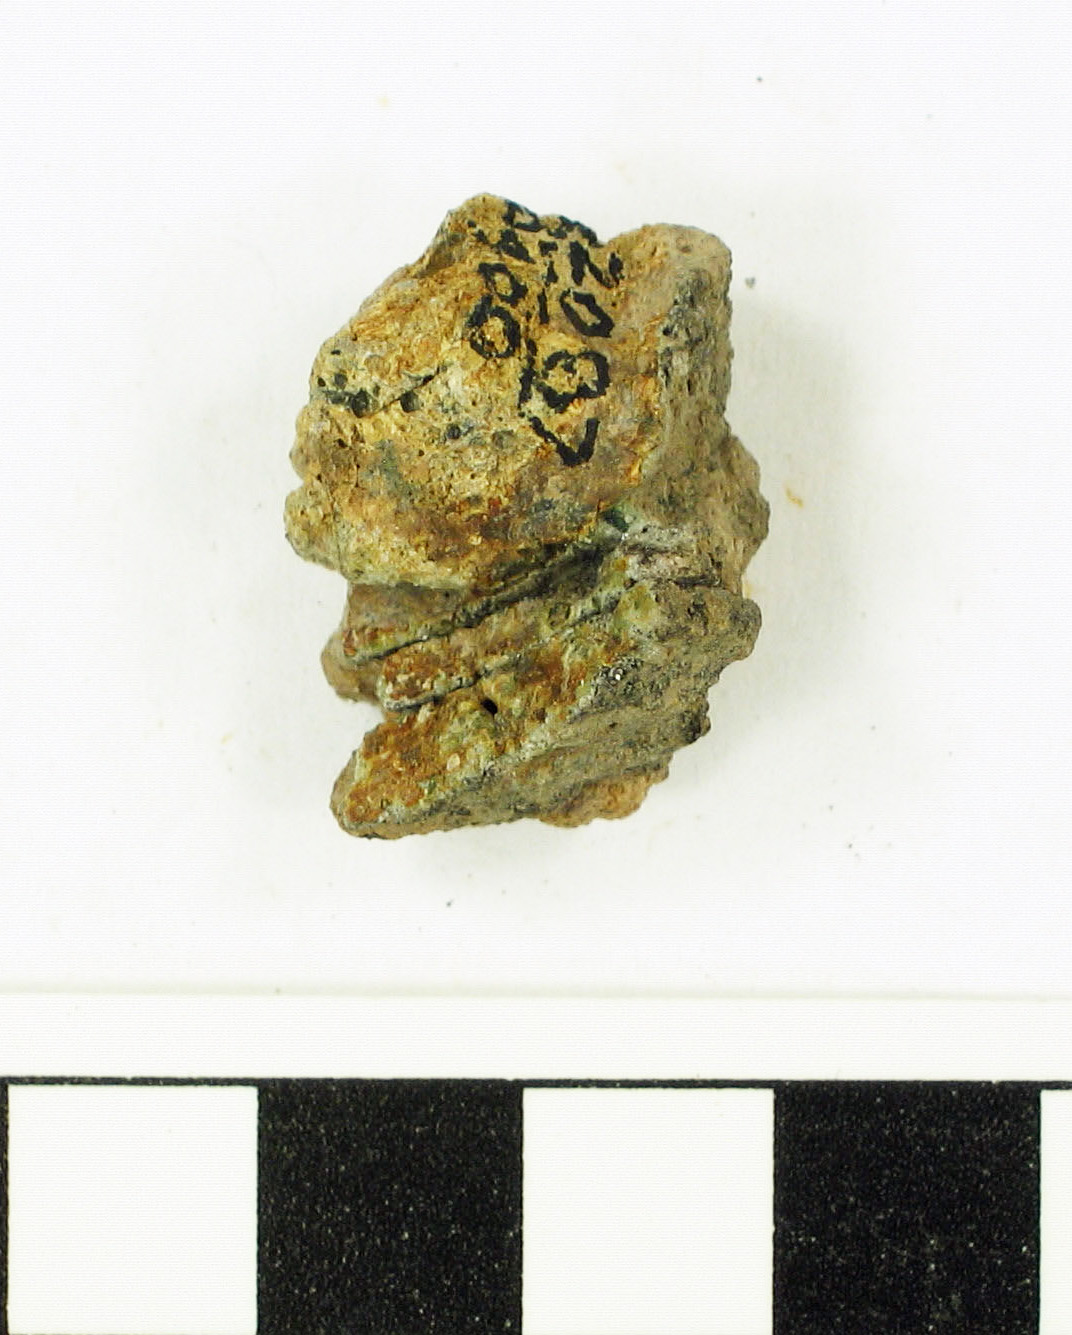 DK 2087/400<br>Body fragment.The piece is vitrified but shows strong surface weathering. The exterior surface is very rough and has mottled colors, but mostly 10YR 6/2, light brownish gray. There is a large rounded vitrified “bubble” or mass on the inside surface, ~1.0 x 1.5cm. The “bubble” is lighter in color, ranging from 10YR 7/4, very pale brown, to 10YR 6/4, light yellowish brown. There is a light greenish white glass on the underside of the bubble where it is separated from the interior surface in a groove ~5.0mm deep, 8.0mm long, and 1.0-2.0mm wide. Remnants of a dark brown glass, 10YR 4/3, line part of the base of the bubble and up onto it at one end. The surface of the bubble is quite frothy in appearance with remnants of small gray, black, and brown glassy bubbles. Temper is quartz sand.